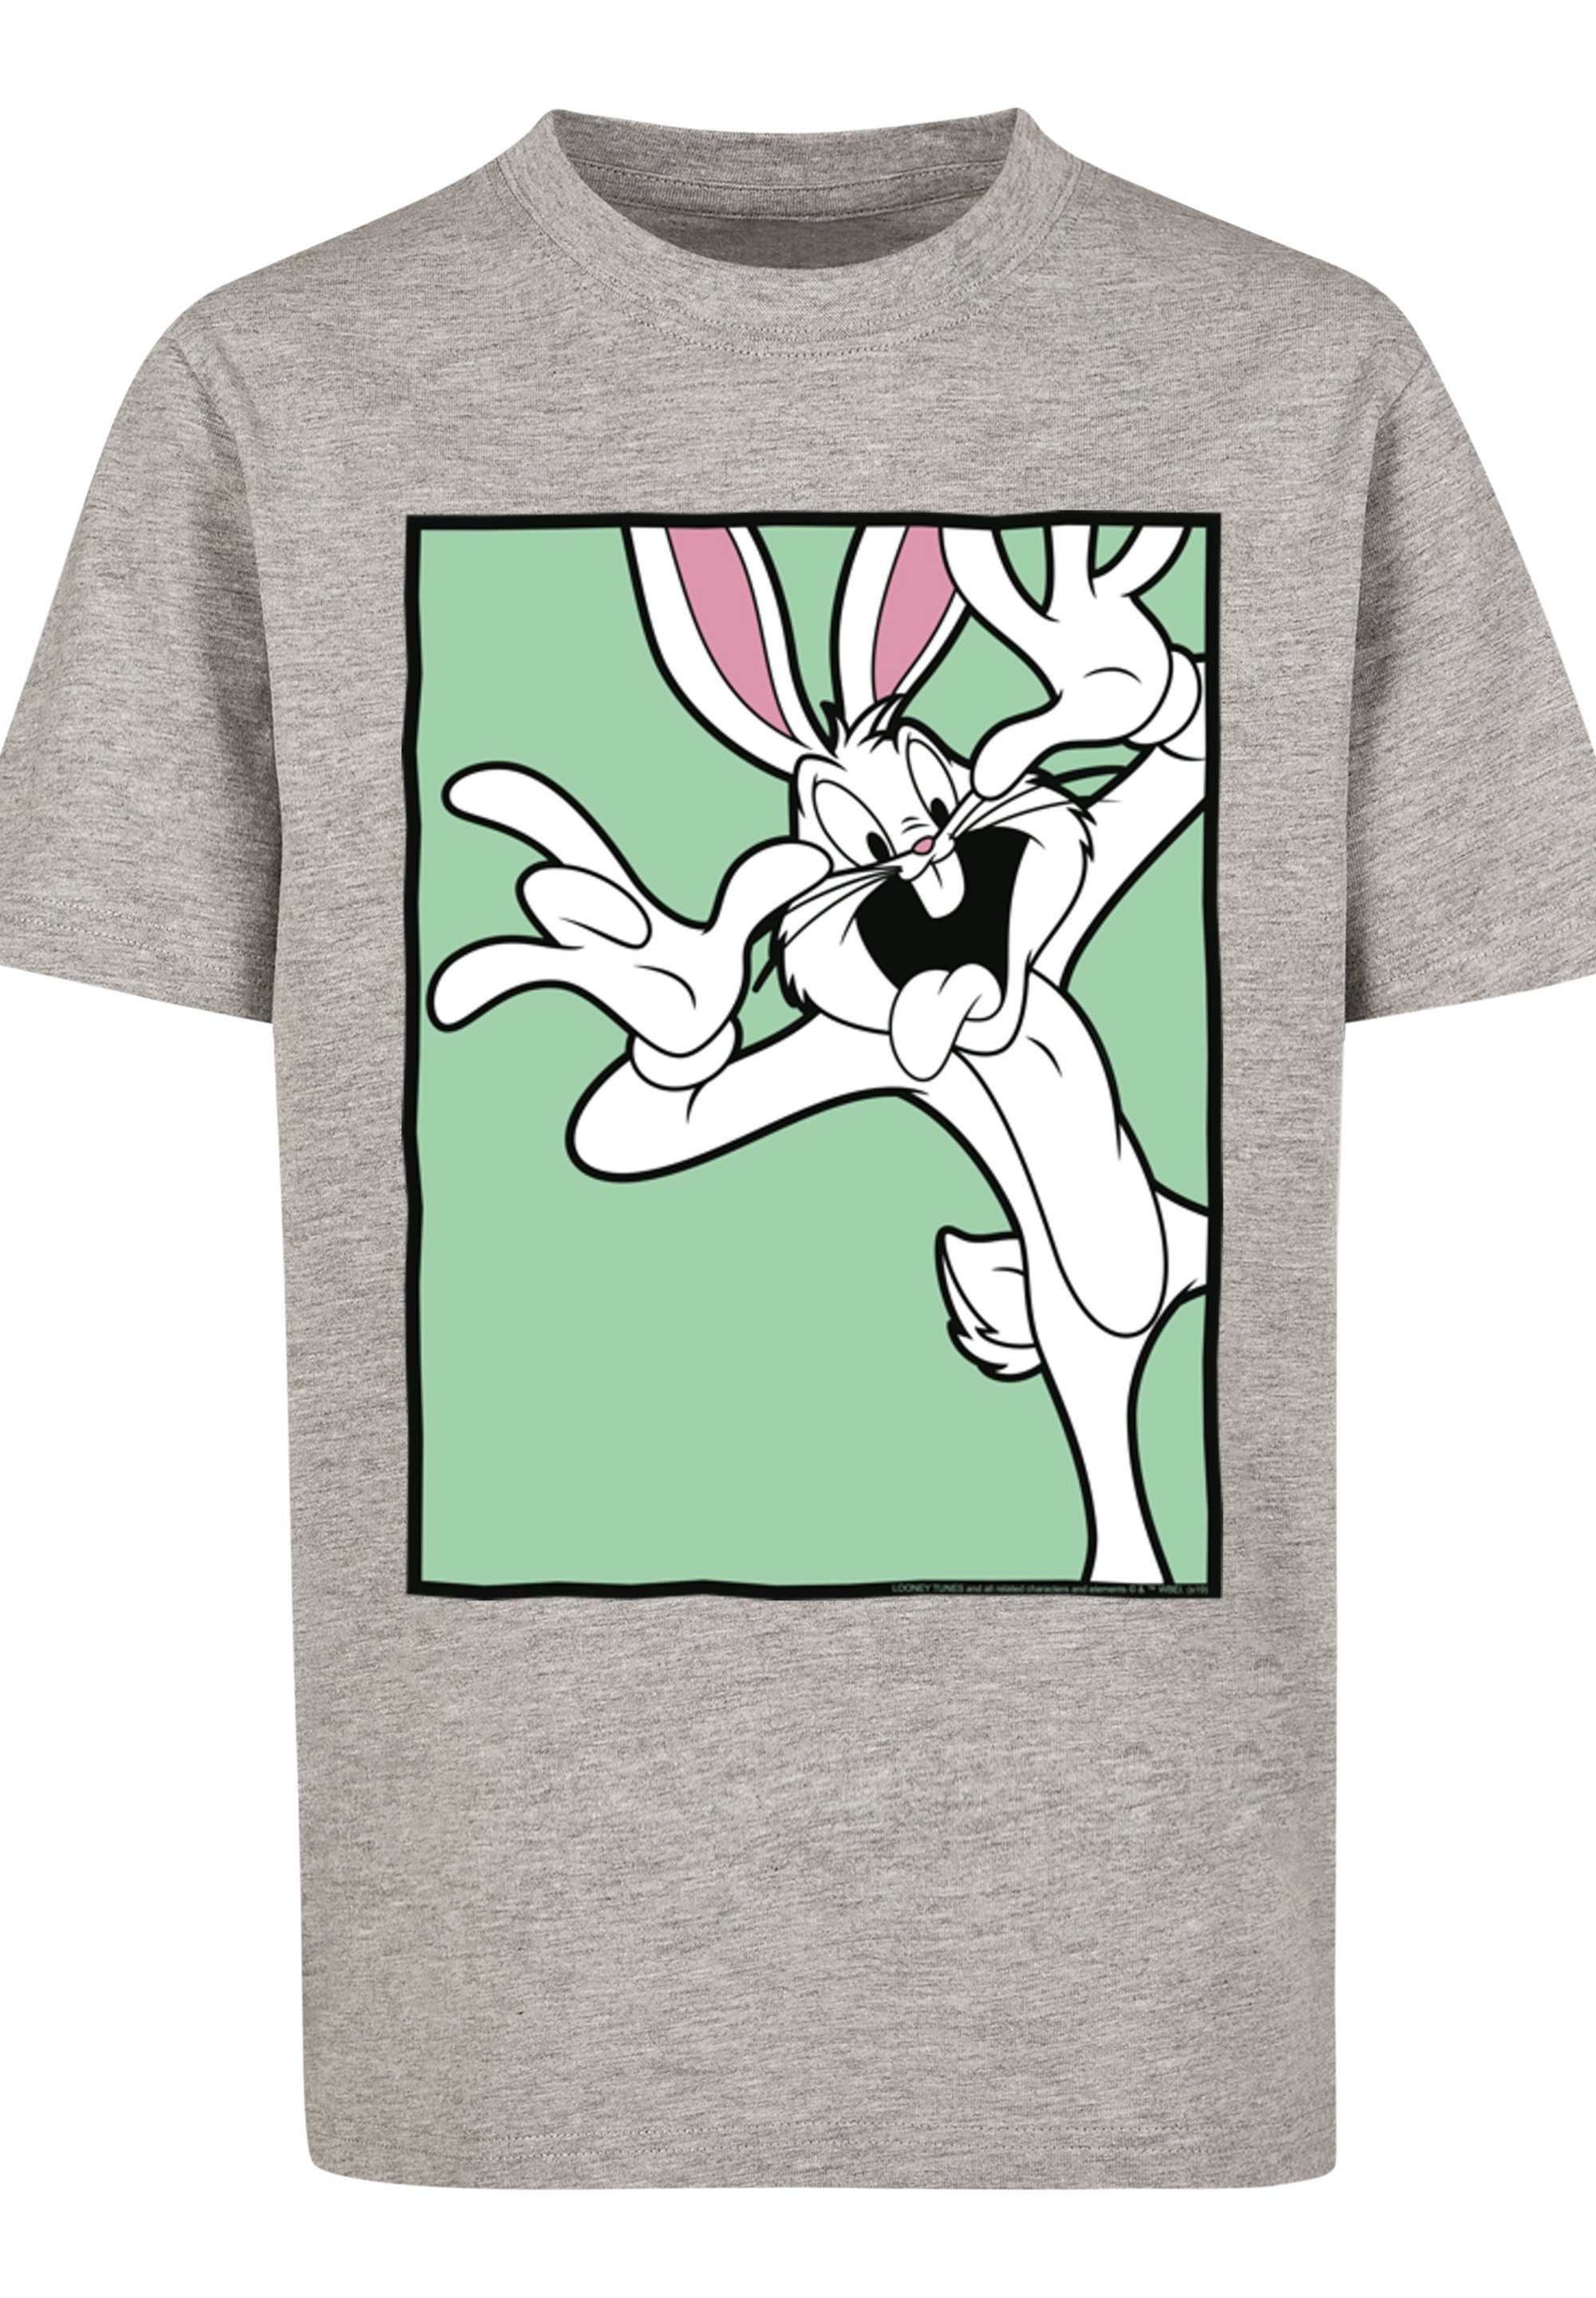 Bugs T-Shirt Tunes Face Bunny Funny heather grey Print F4NT4STIC Looney